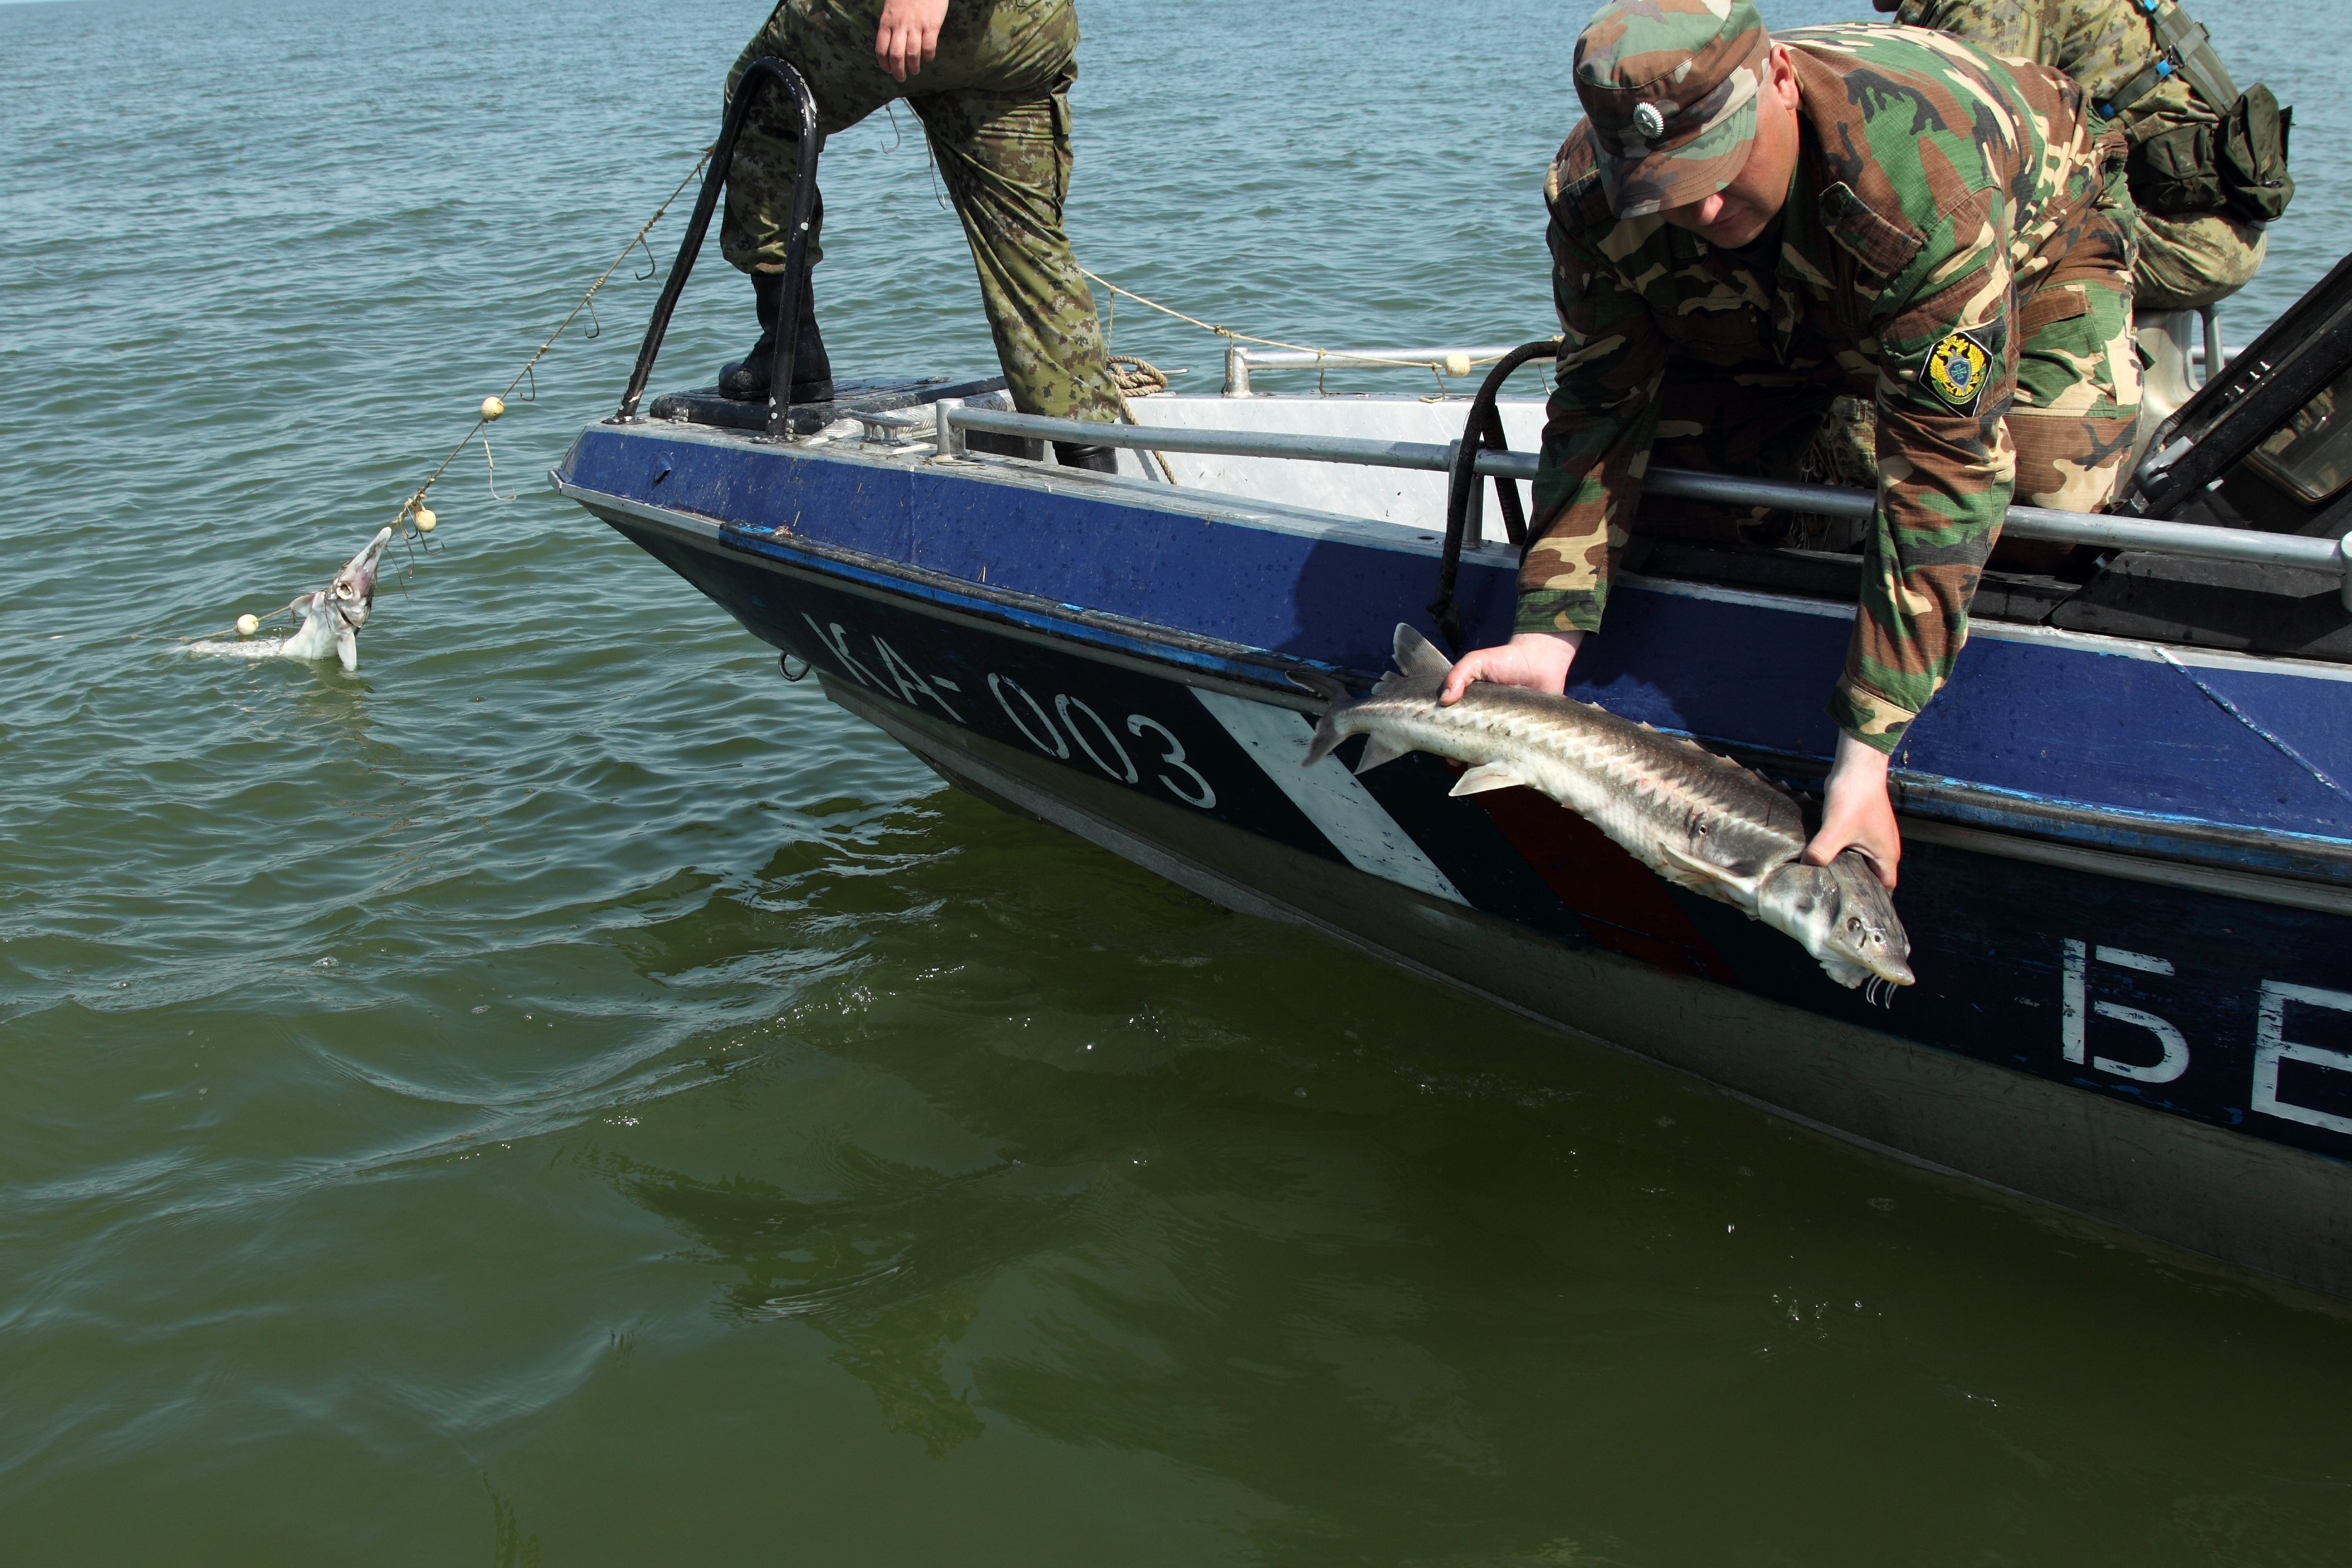 Illegal fishing on the Danube